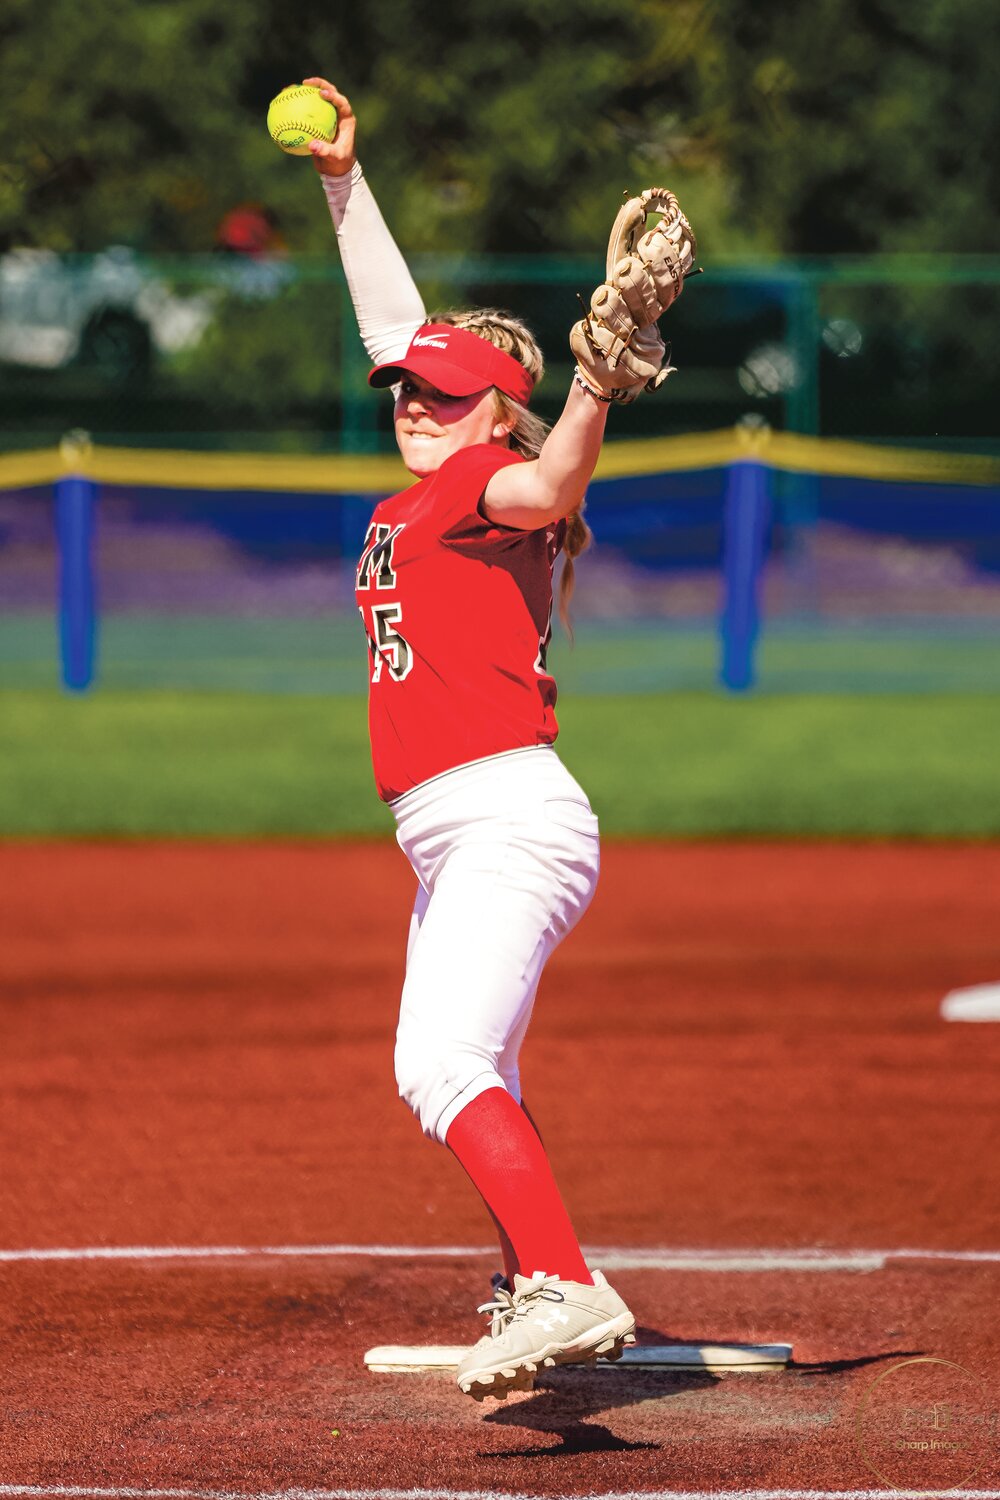 Mallory Hoke delivers a pitch against Lincoln on Thursday, May 18.